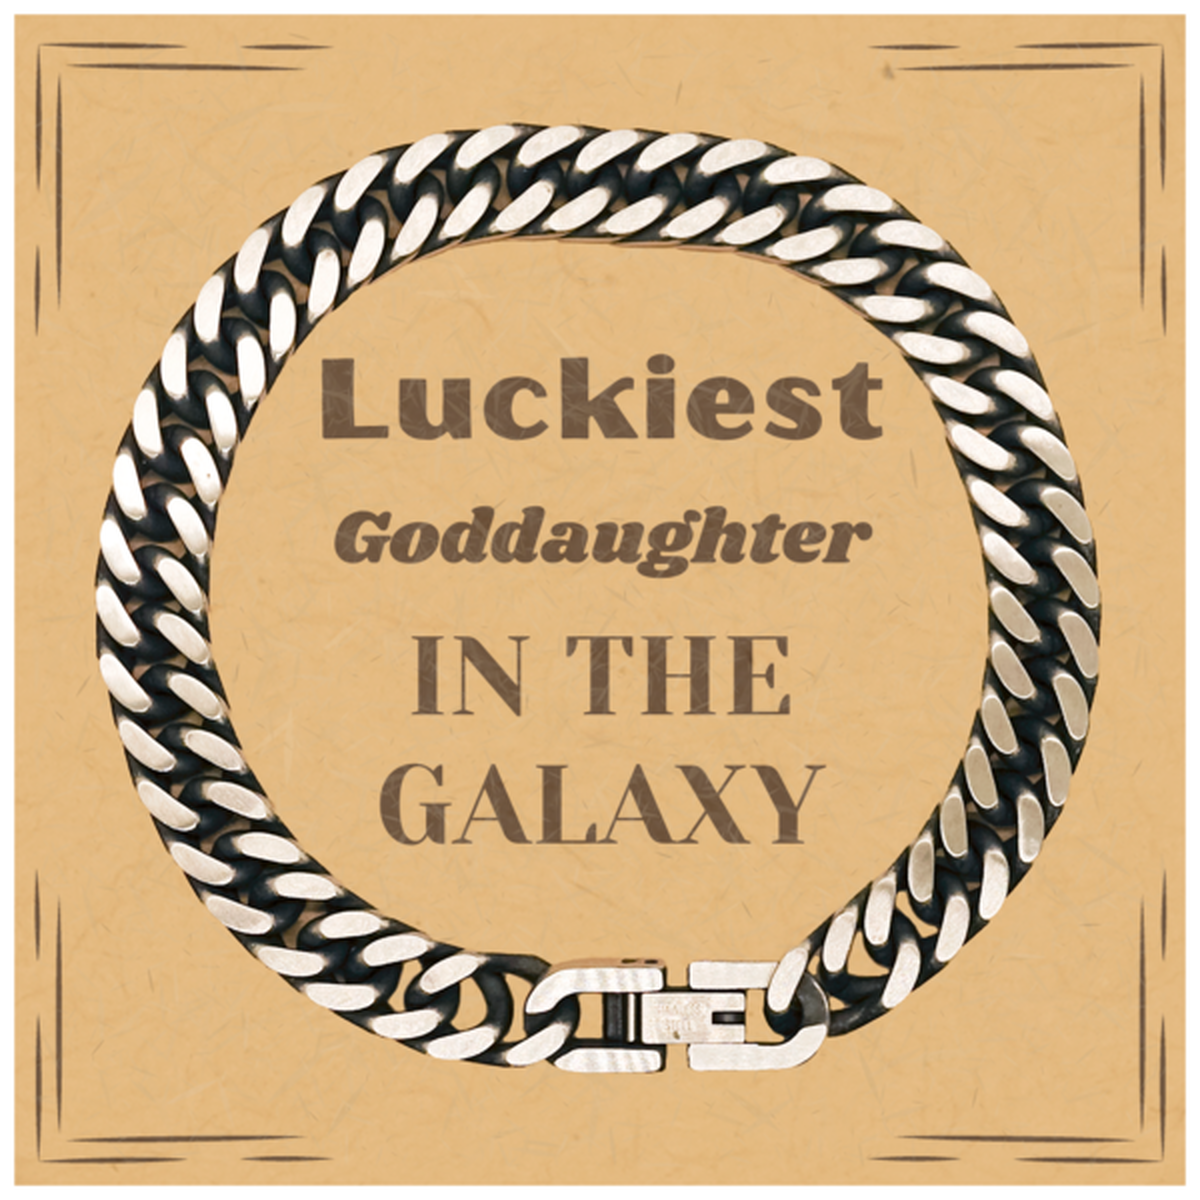 Luckiest Goddaughter in the Galaxy, To My Goddaughter Message Card Gifts, Christmas Goddaughter Cuban Link Chain Bracelet Gifts, X-mas Birthday Unique Gifts For Goddaughter Men Women